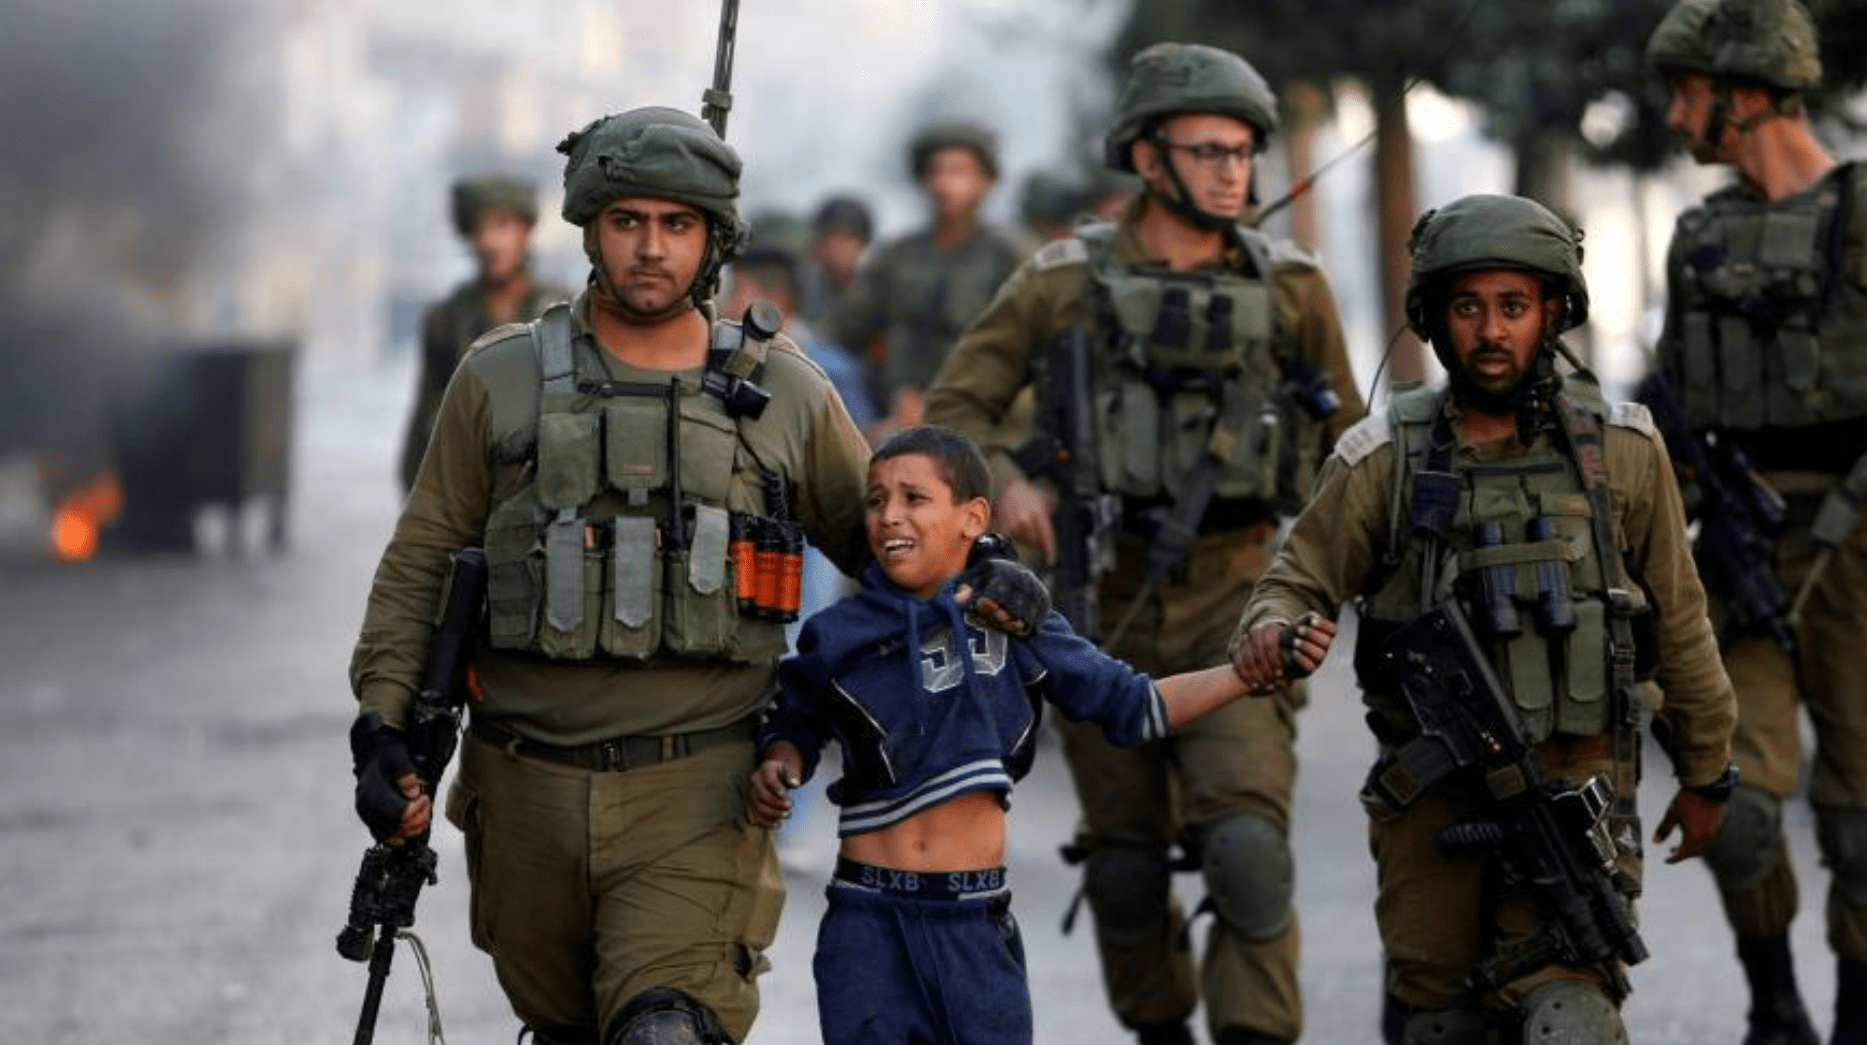 The Israeli government demanded a correction from Jewish U.S. Senator Bernie Sanders, insisting it had killed "only" 532 Palestinian children in the summer of 2014. And according to the United Nations, "Israel tortures Palestinian children and also uses them as shields."